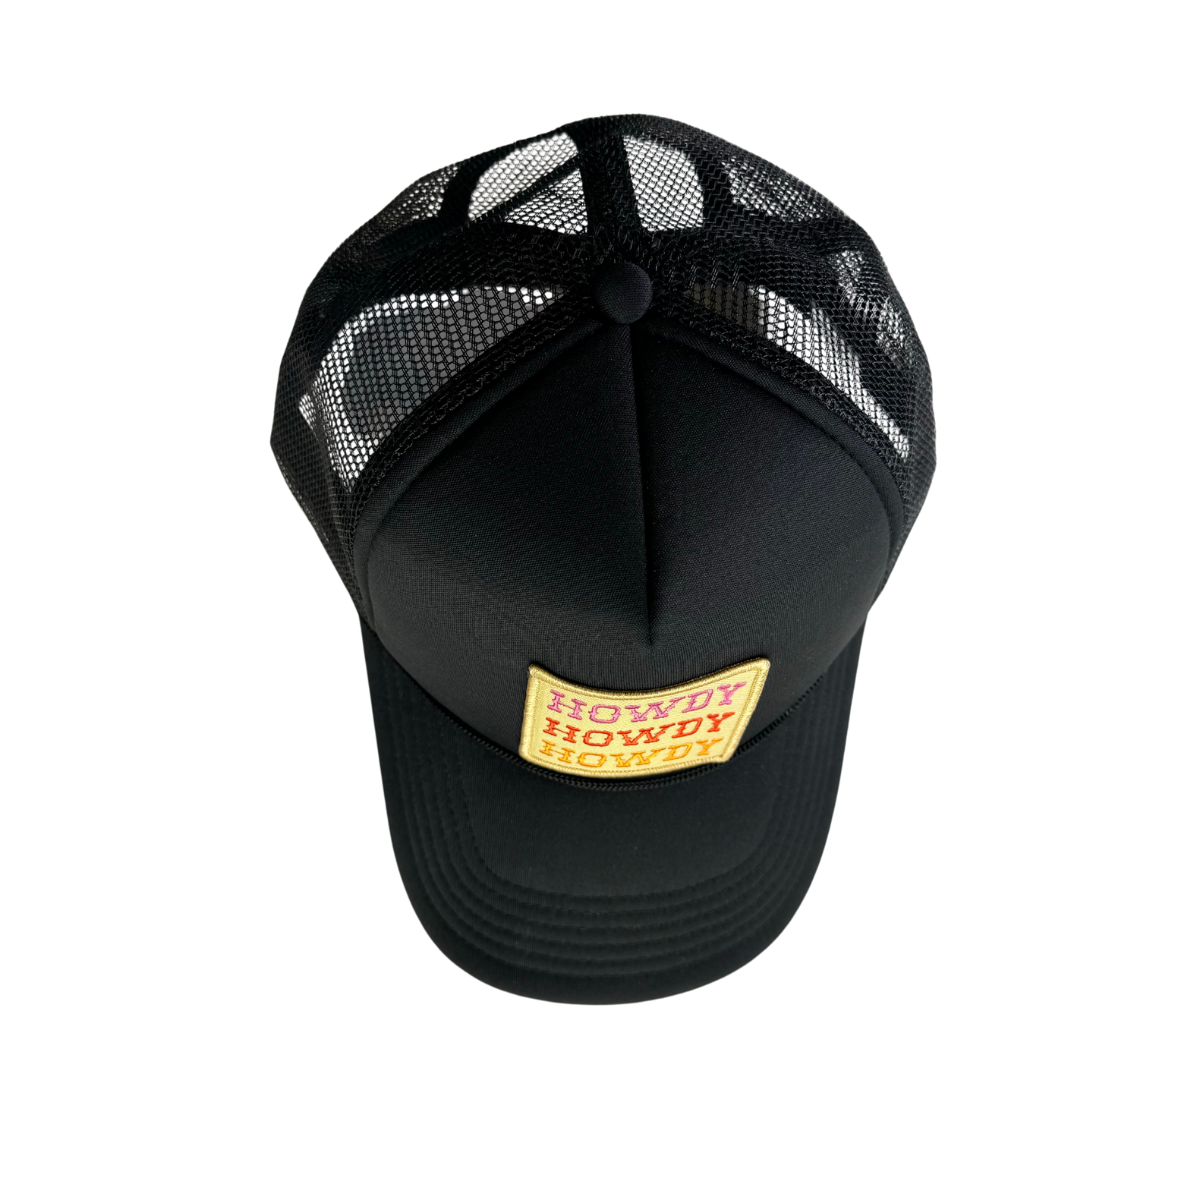 Howdy Embroidered Patch Black Trucker Hat